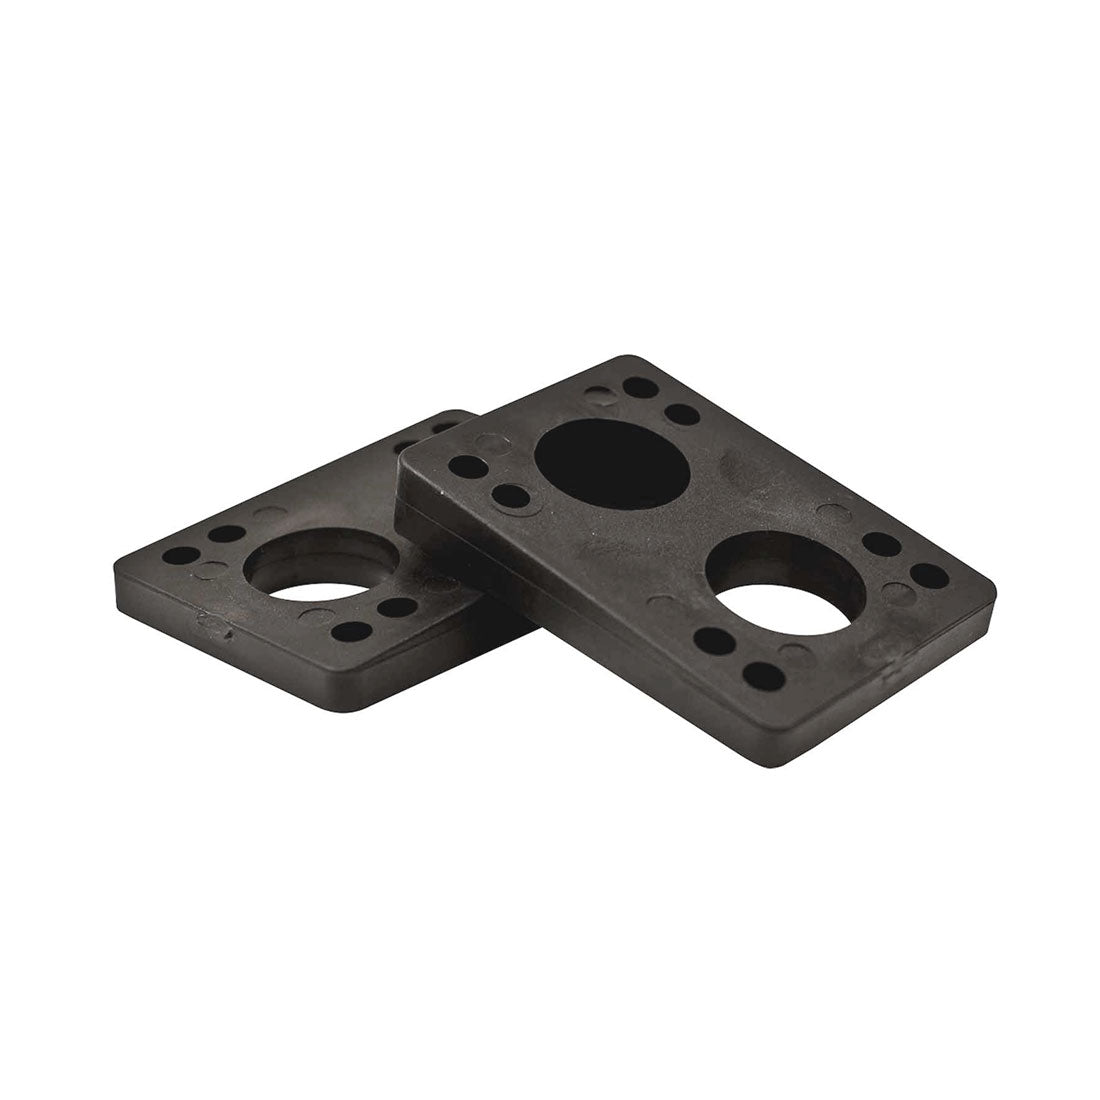 Absolute Angled Riser Pads 2pk - Black Skateboard Hardware and Parts